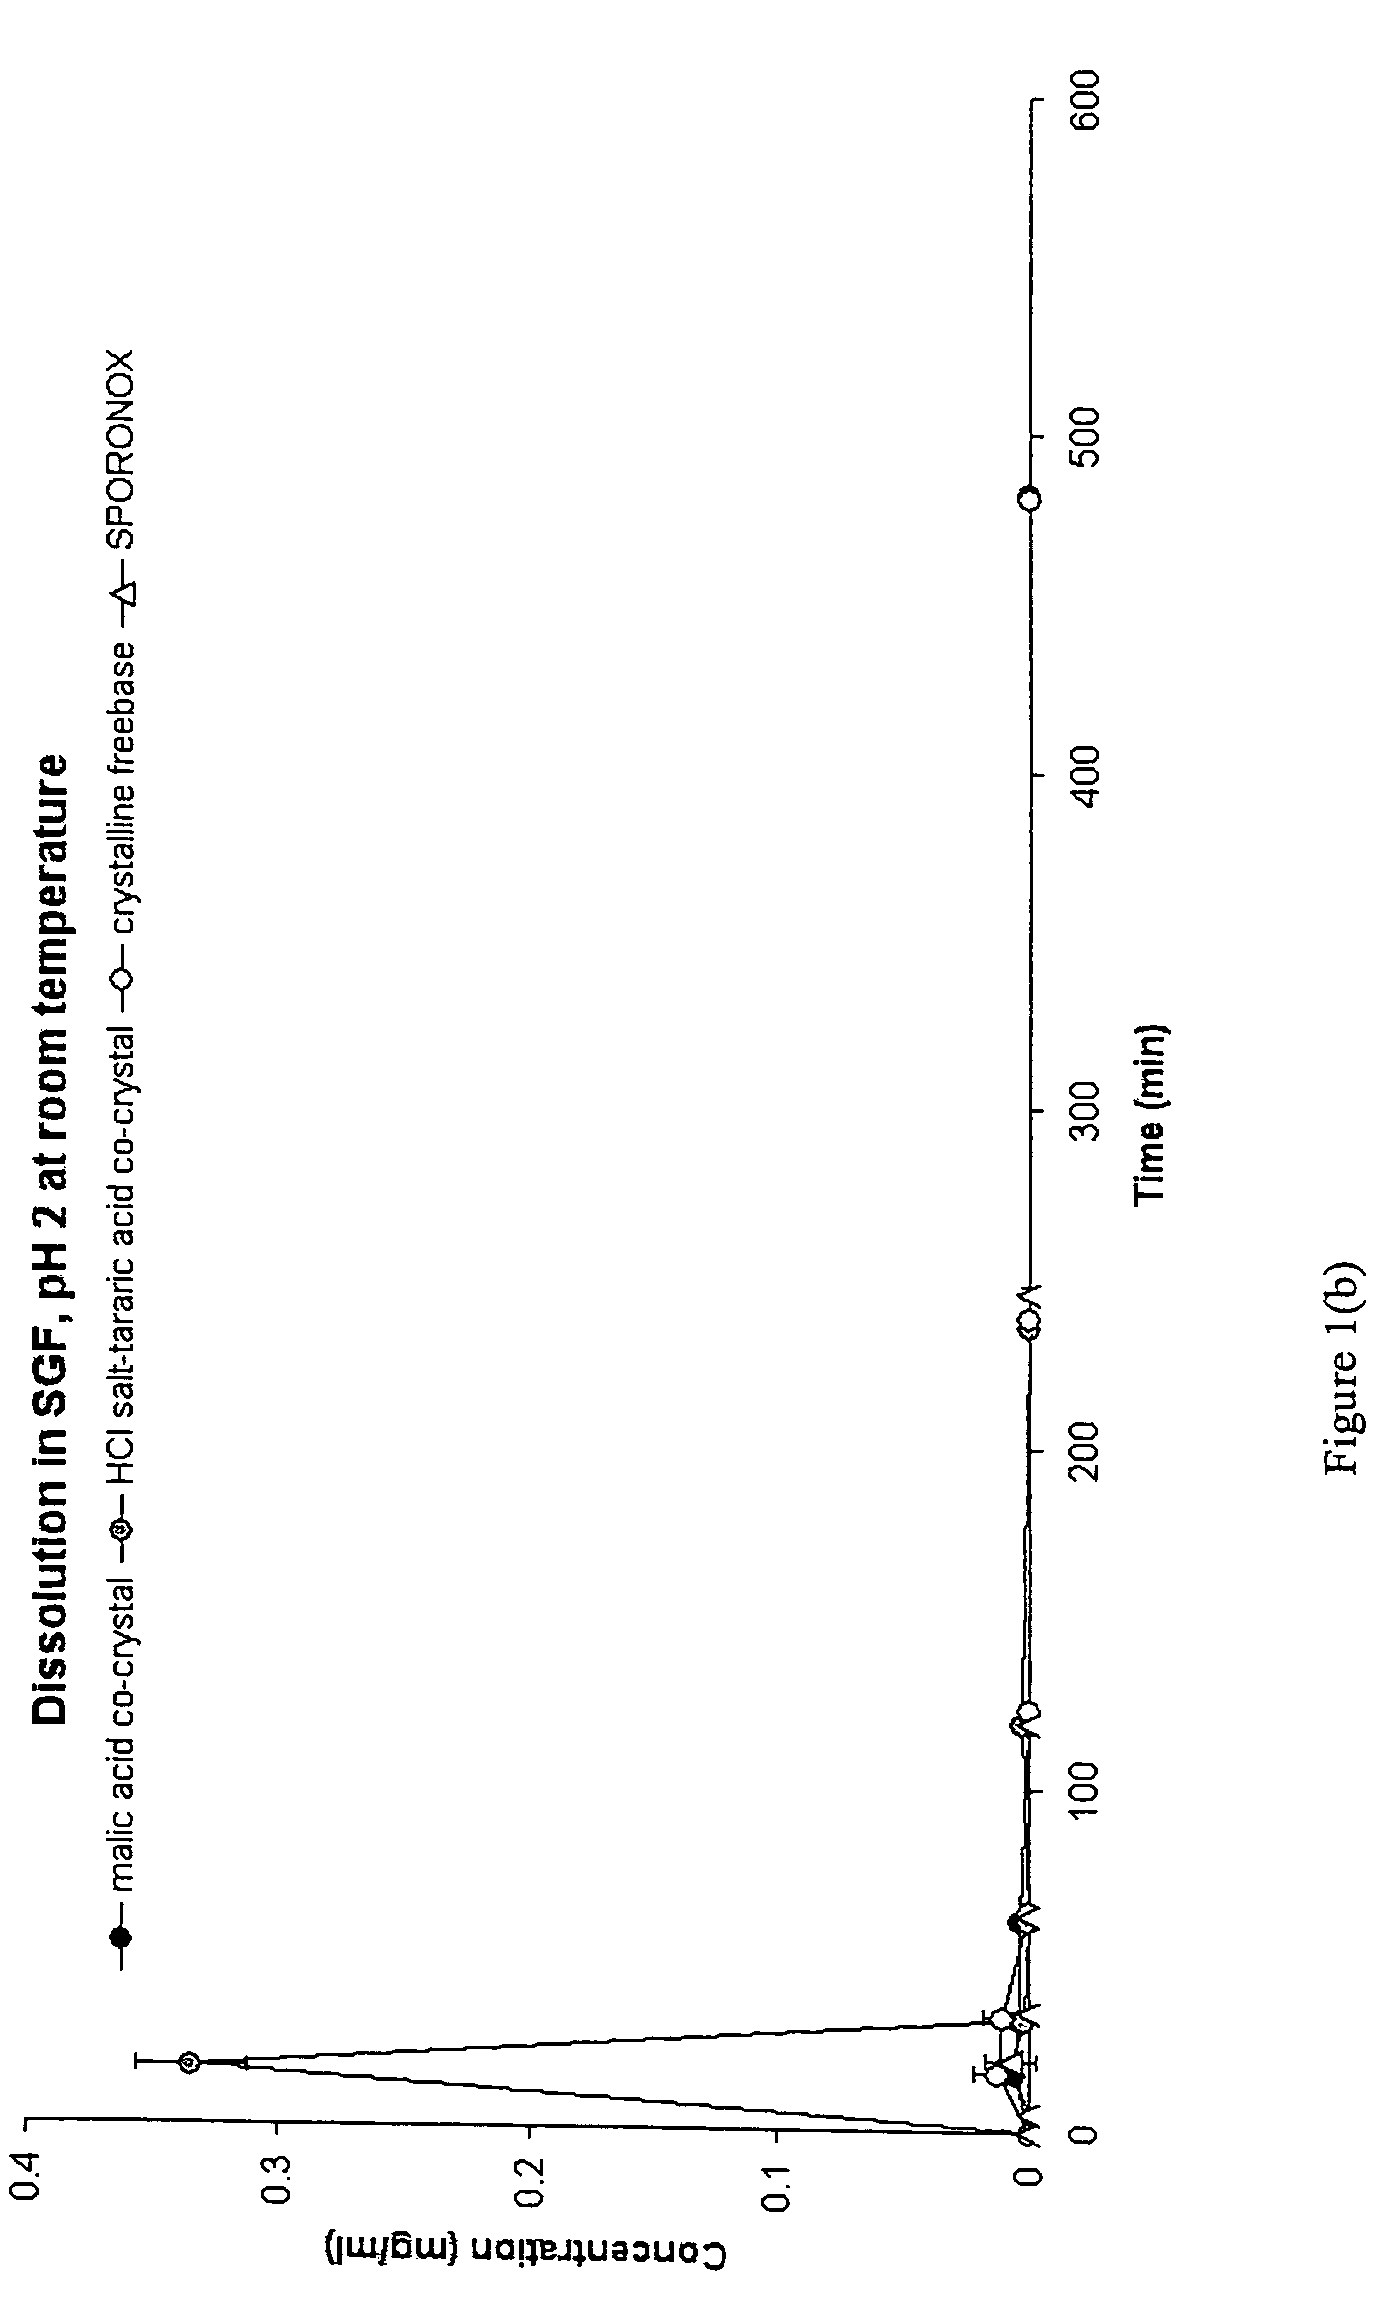 Crystalline forms of conazoles and methods of making and using the same